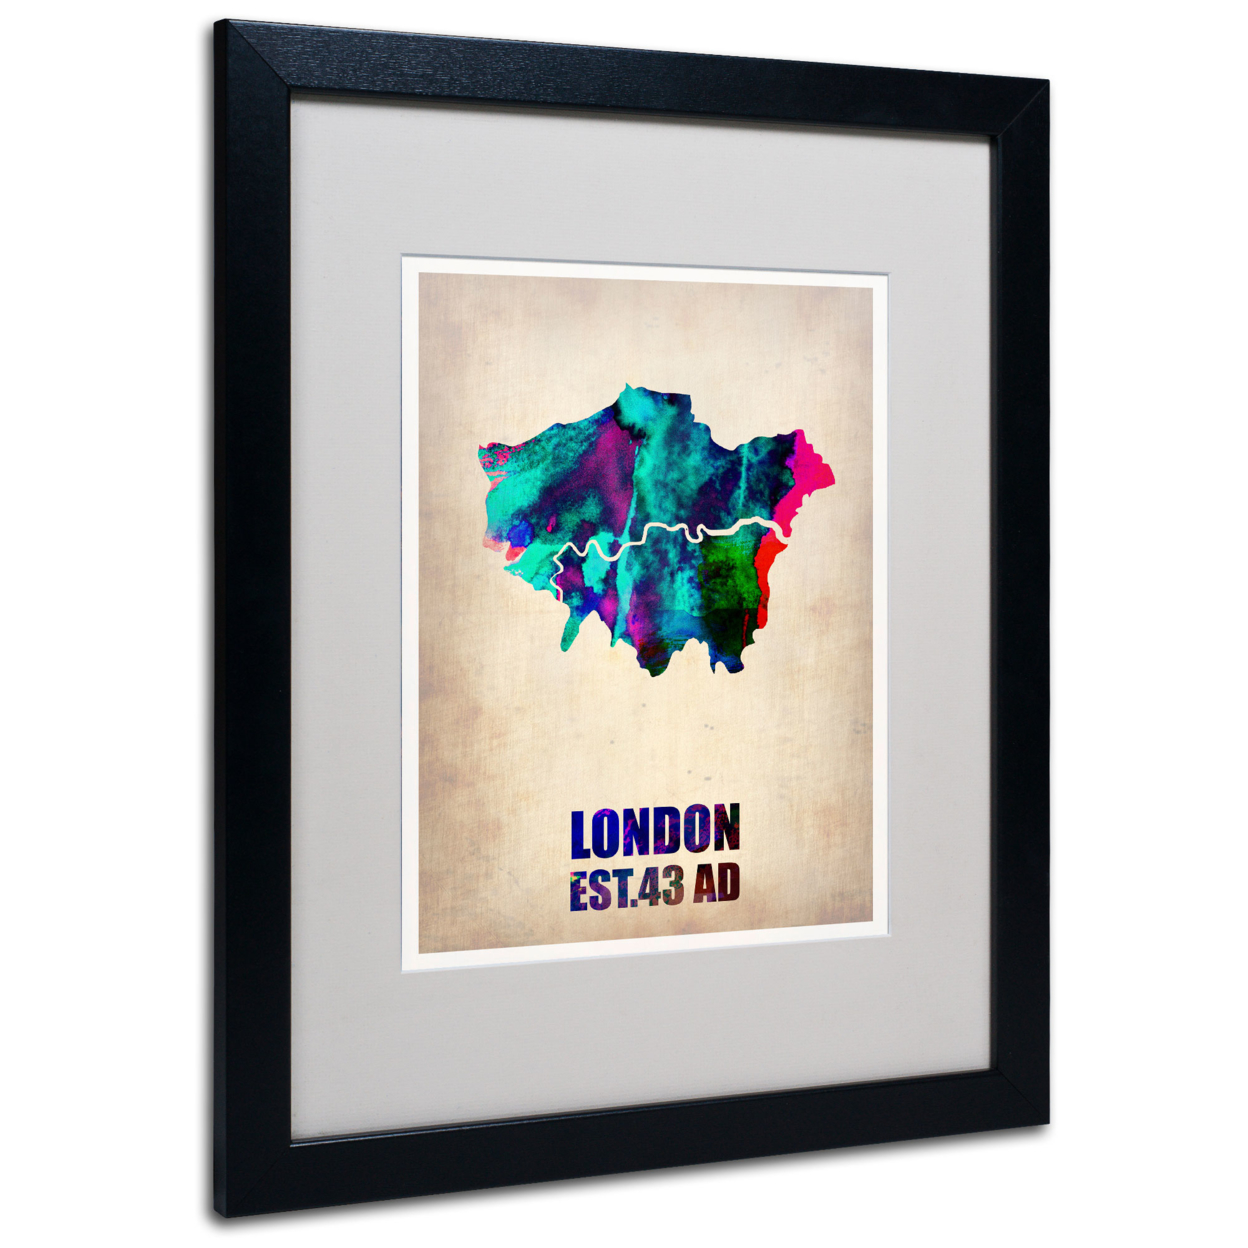 Naxart 'London Watercolor Map 2' Black Wooden Framed Art 18 X 22 Inches